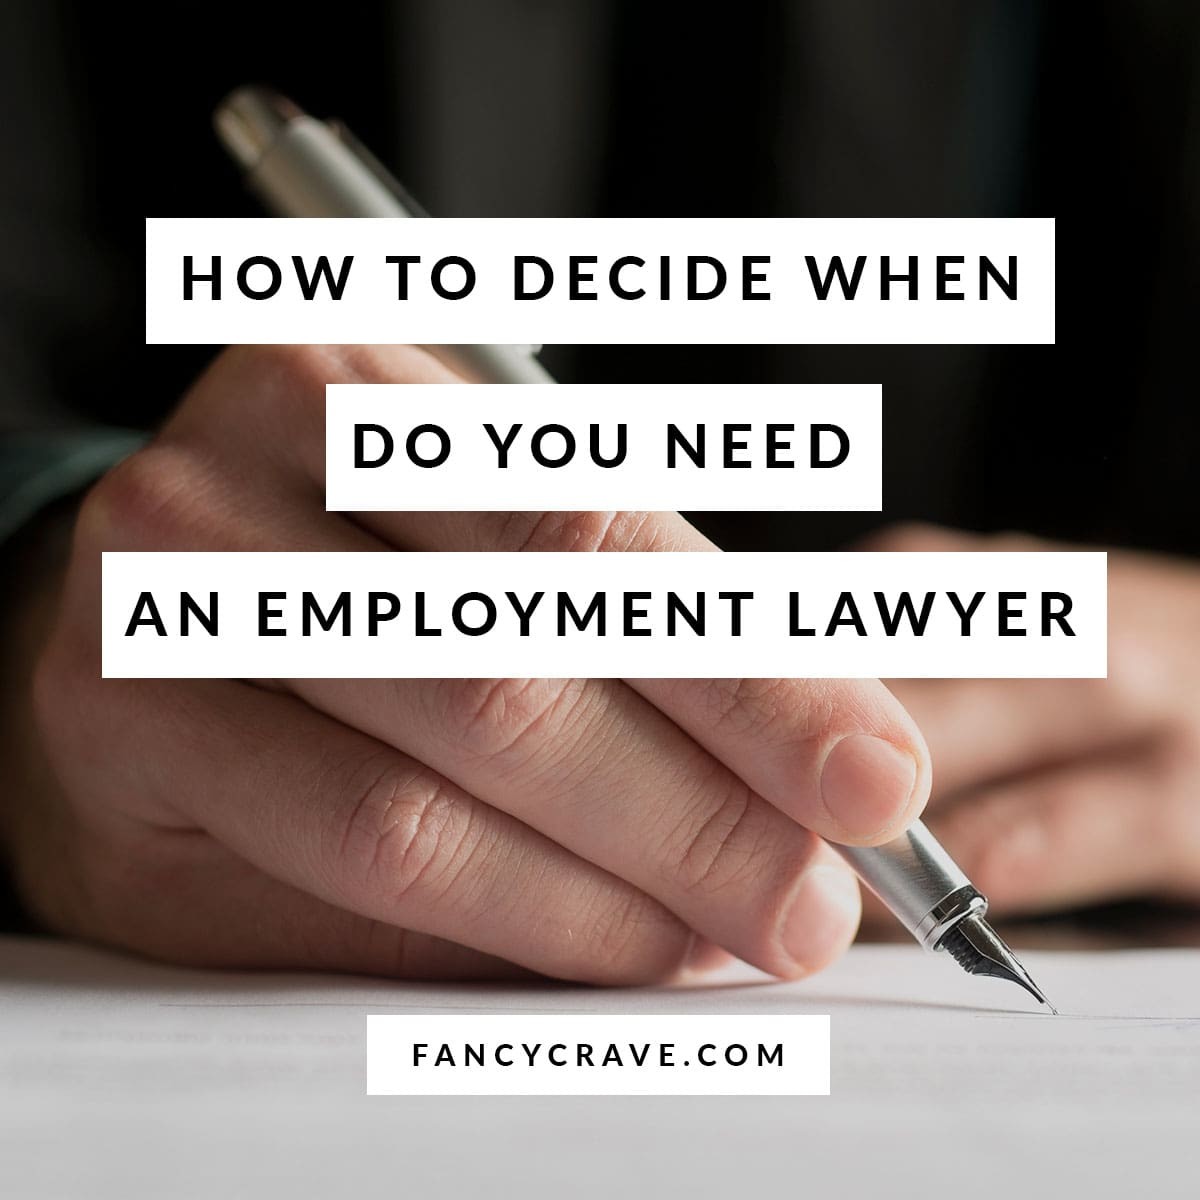 How to Decide When Do You Need an Employment Lawyer